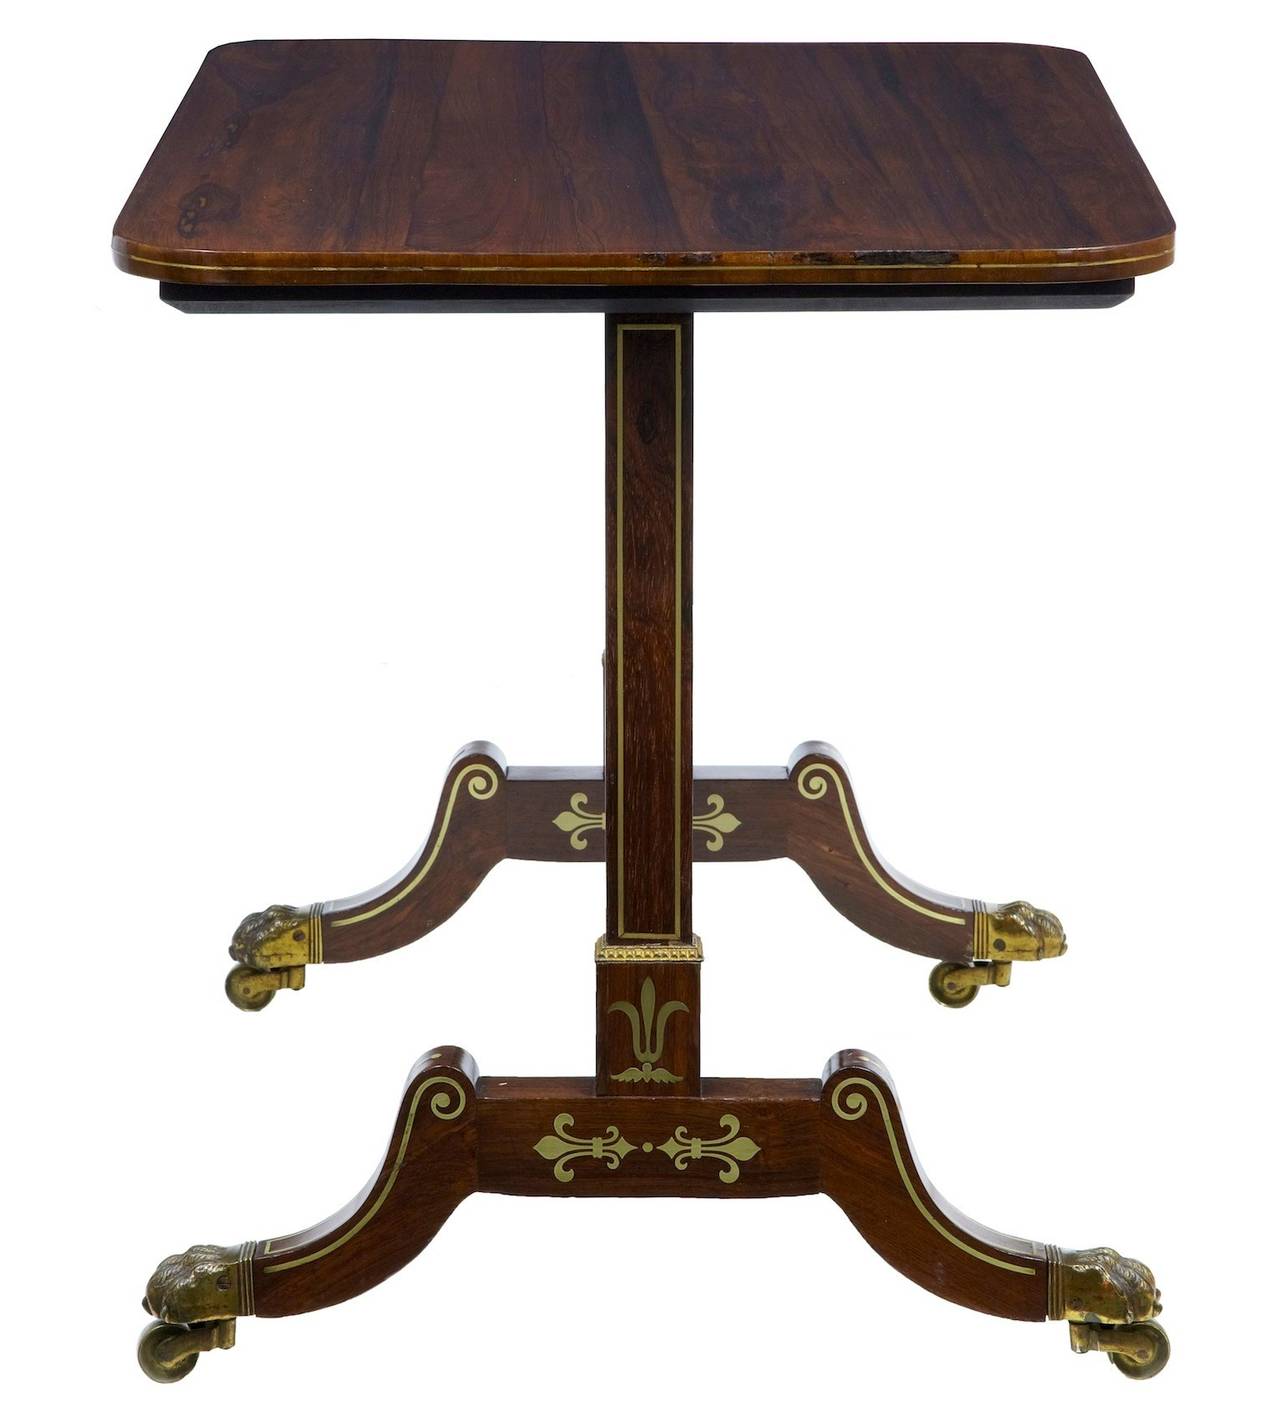 Top quality table in stunning condition, circa 1820. 

Fine quality Regency table in original condition, beautifully inlaid with fleur-de-lys motifs. Standing on original hairy paw feet and castors.

Measures: Height 28